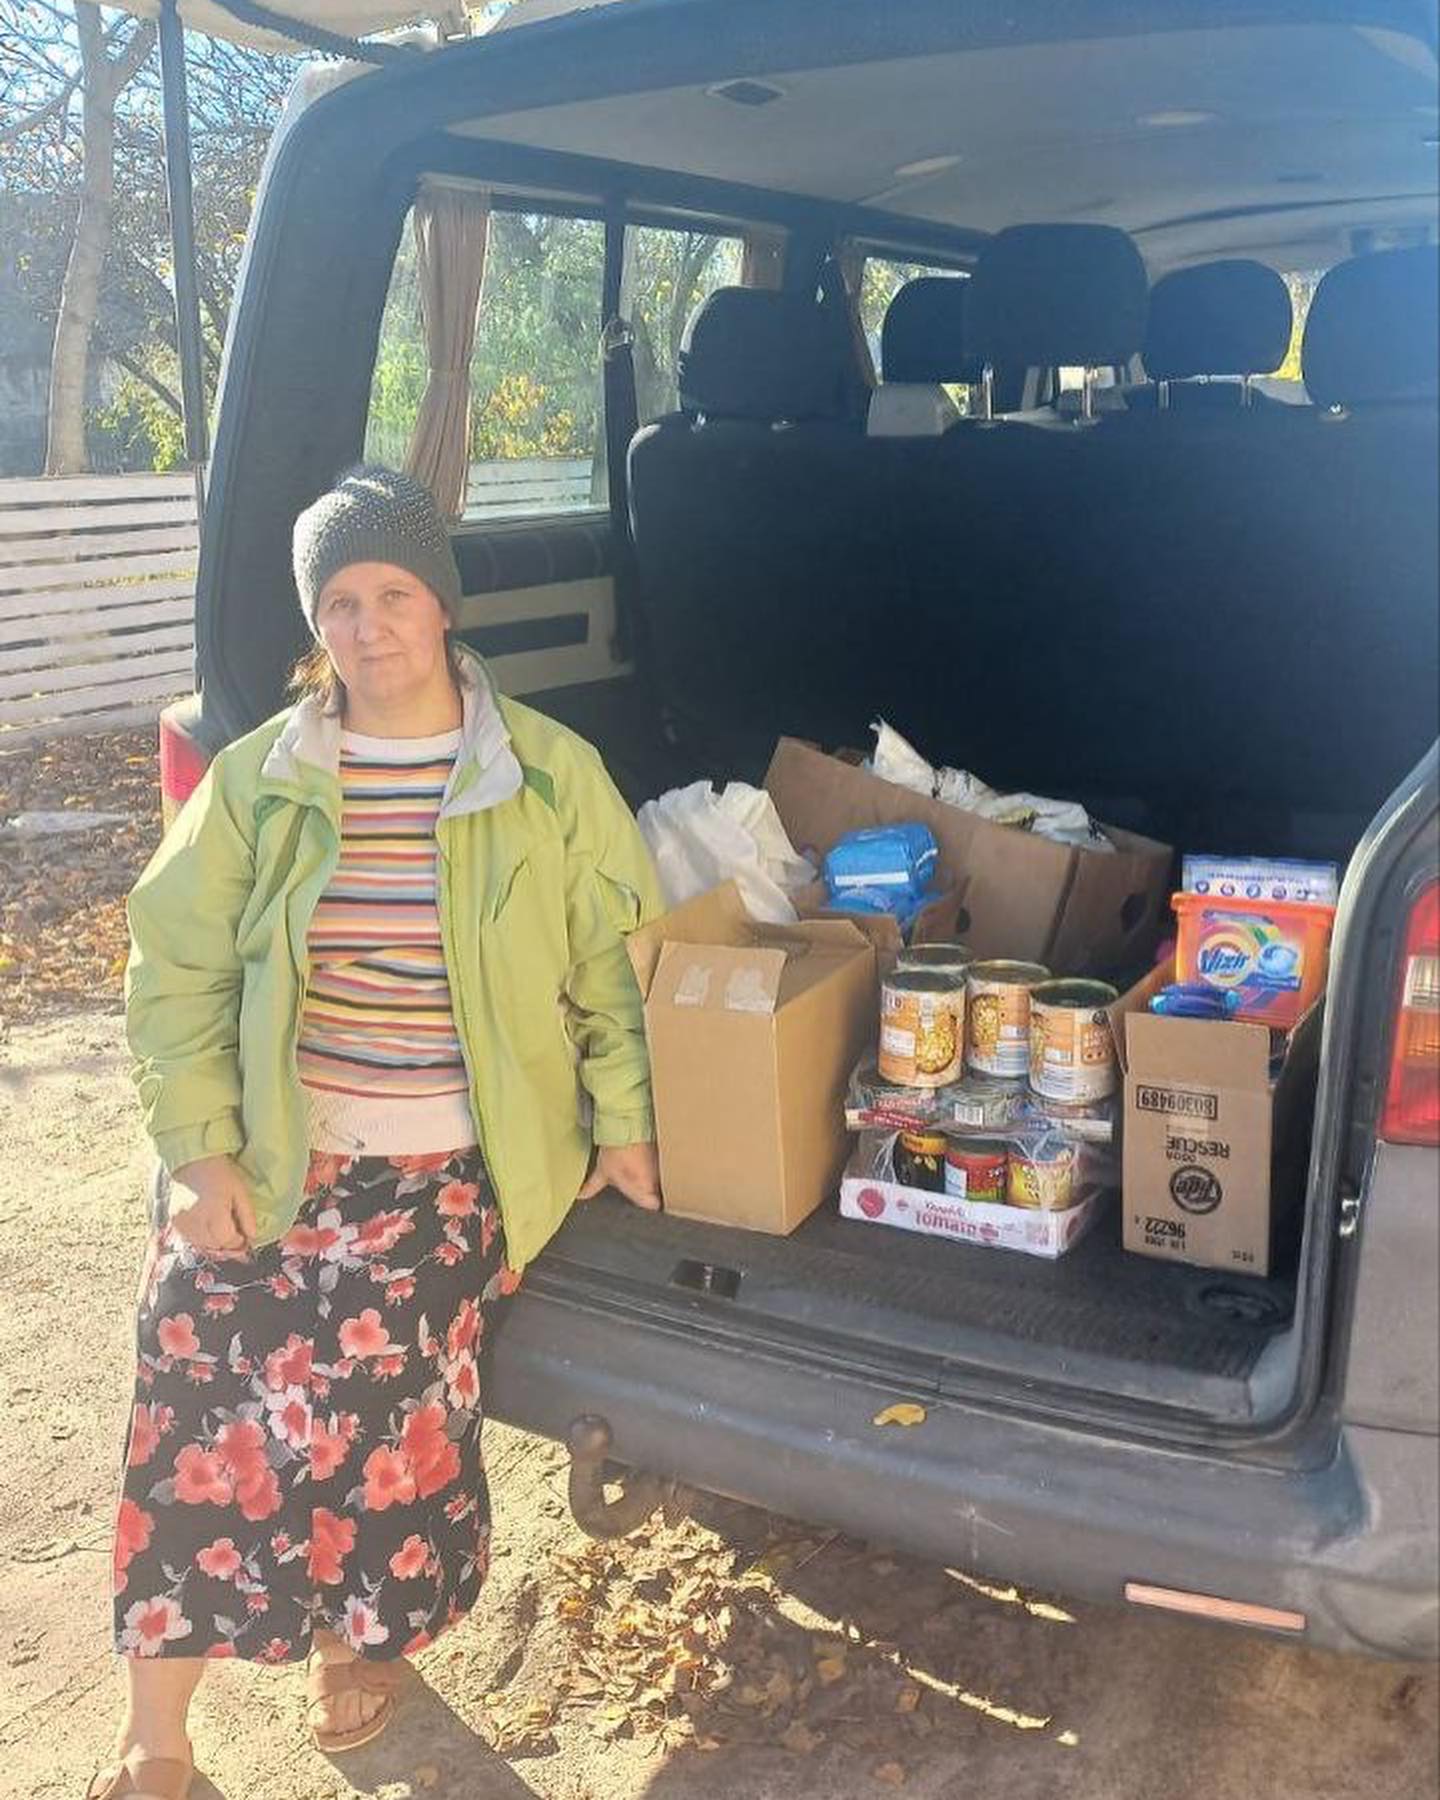 A woman standing next to a van full of food.